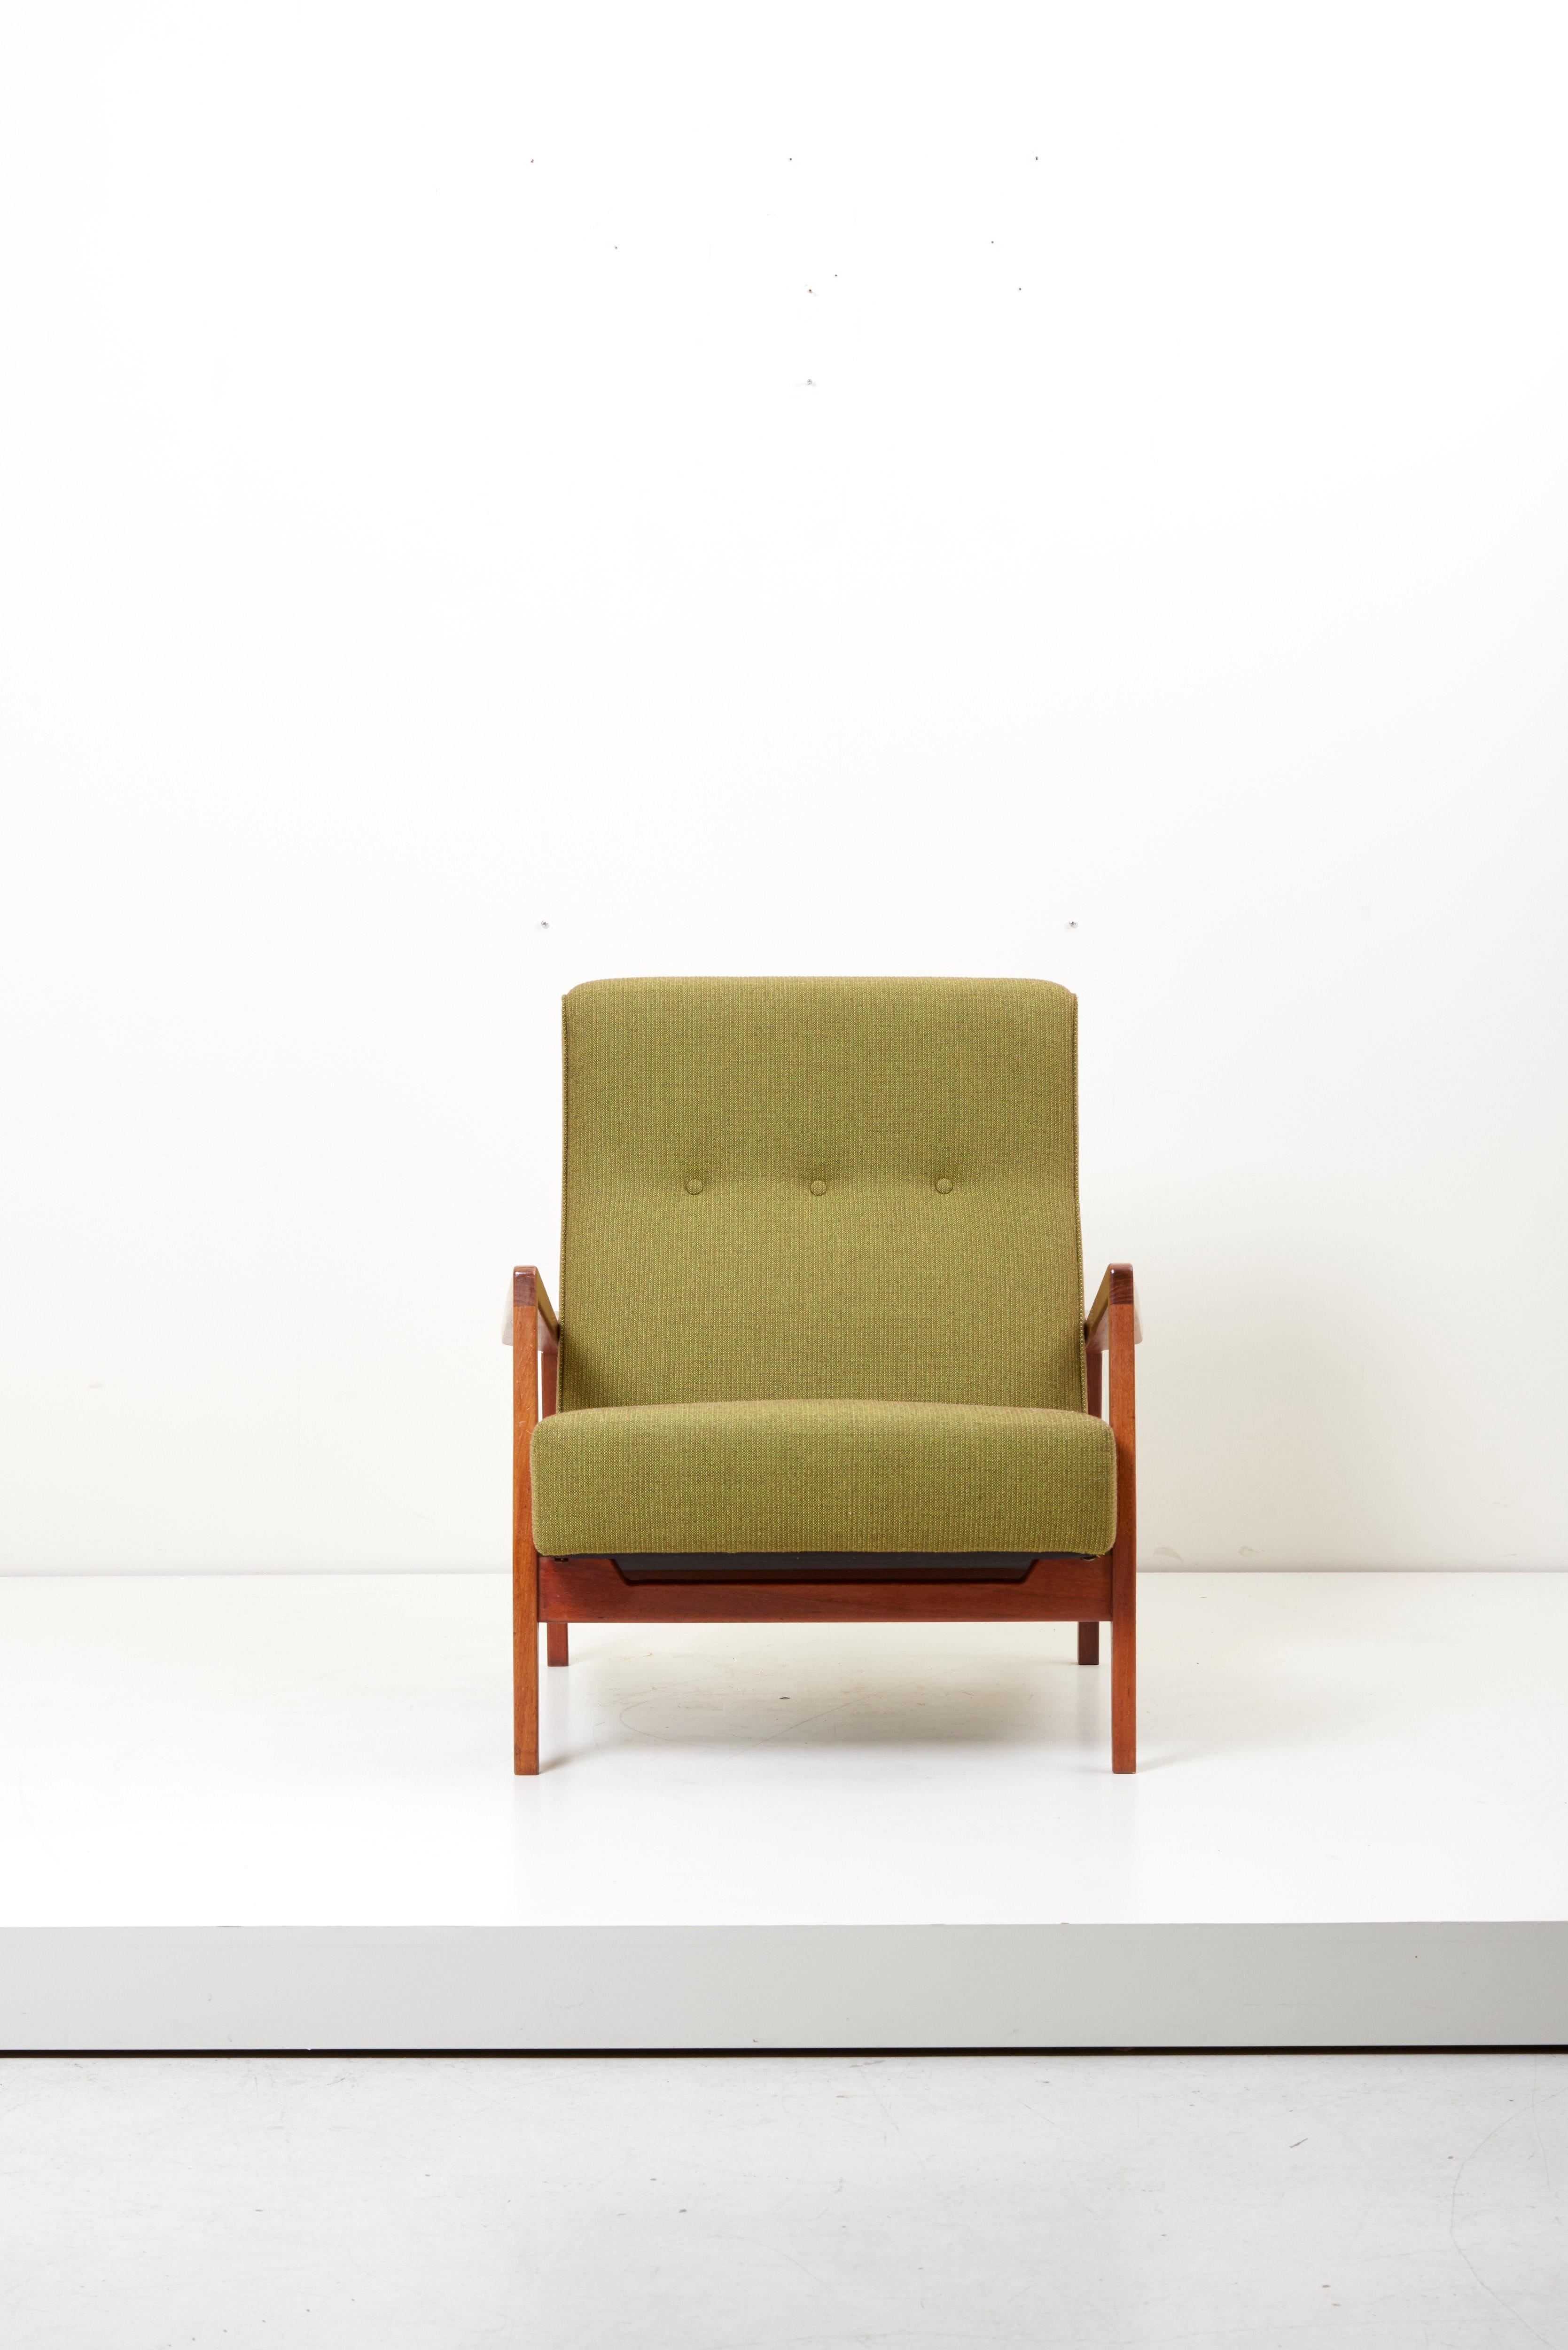 Rare high back lounge chair by Jens Risom.
Newly refinished and upholstered in original Risom fabric by Camira.